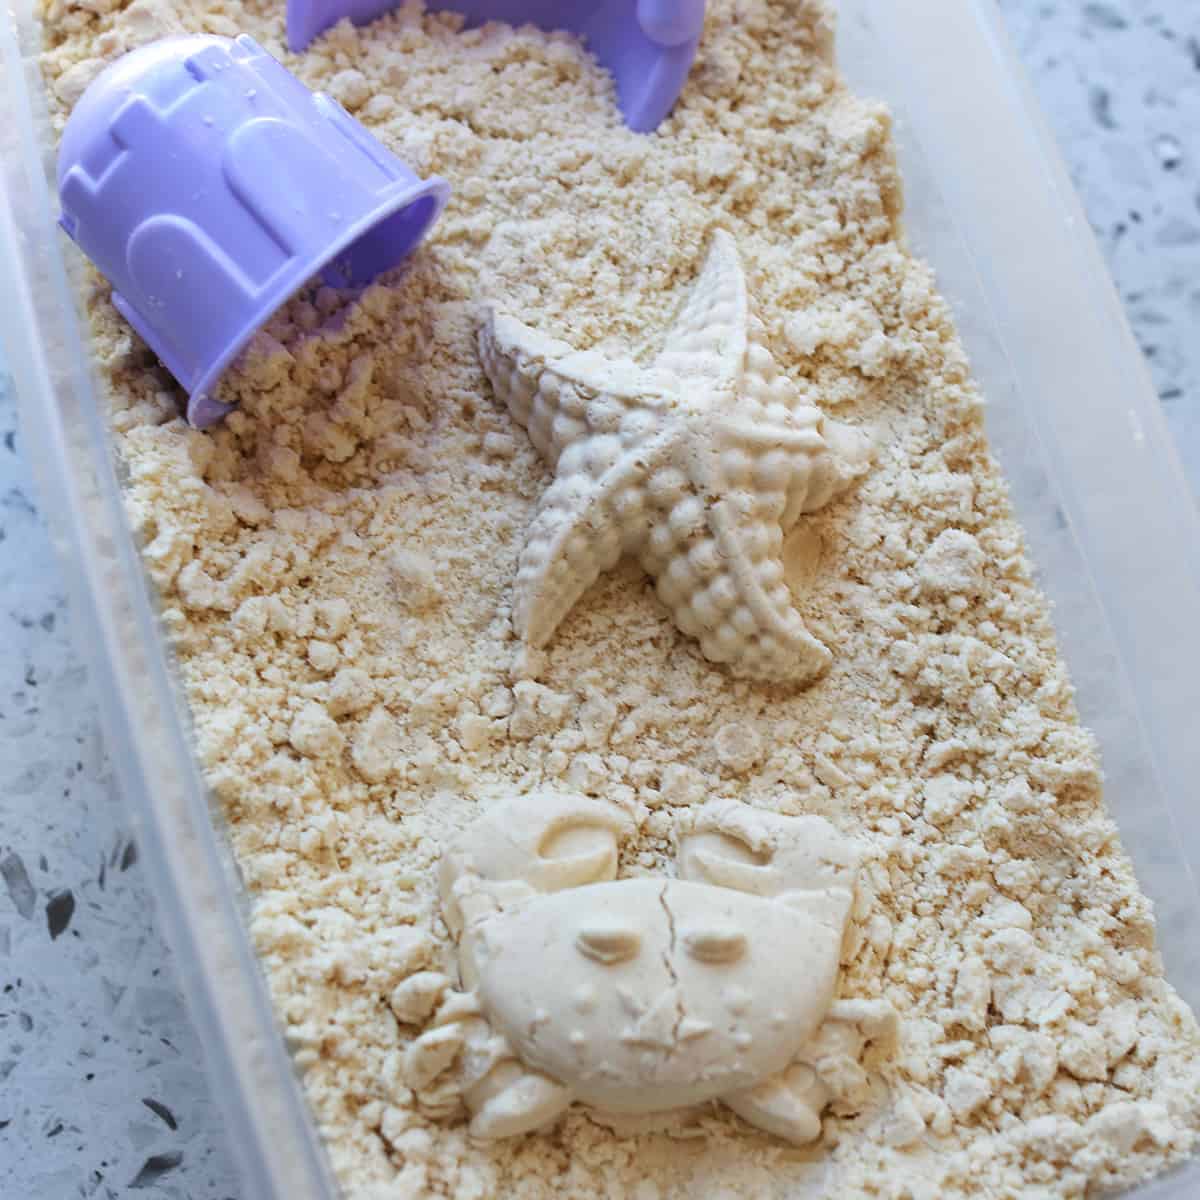 Moon sand shaped as starfish and crab in clear container with purple scoop. 